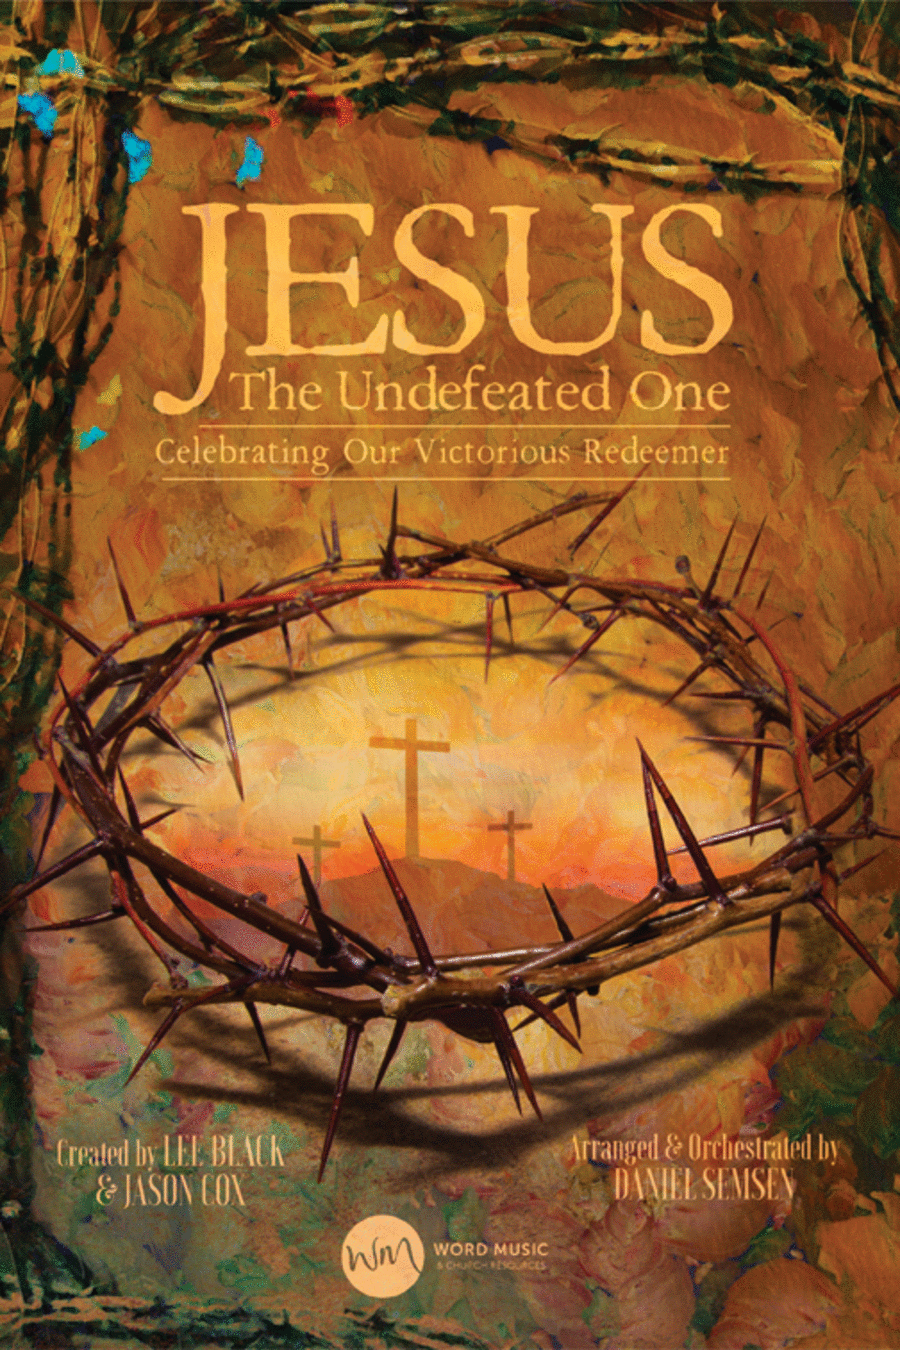 JESUS The Undefeated One - Choral Book